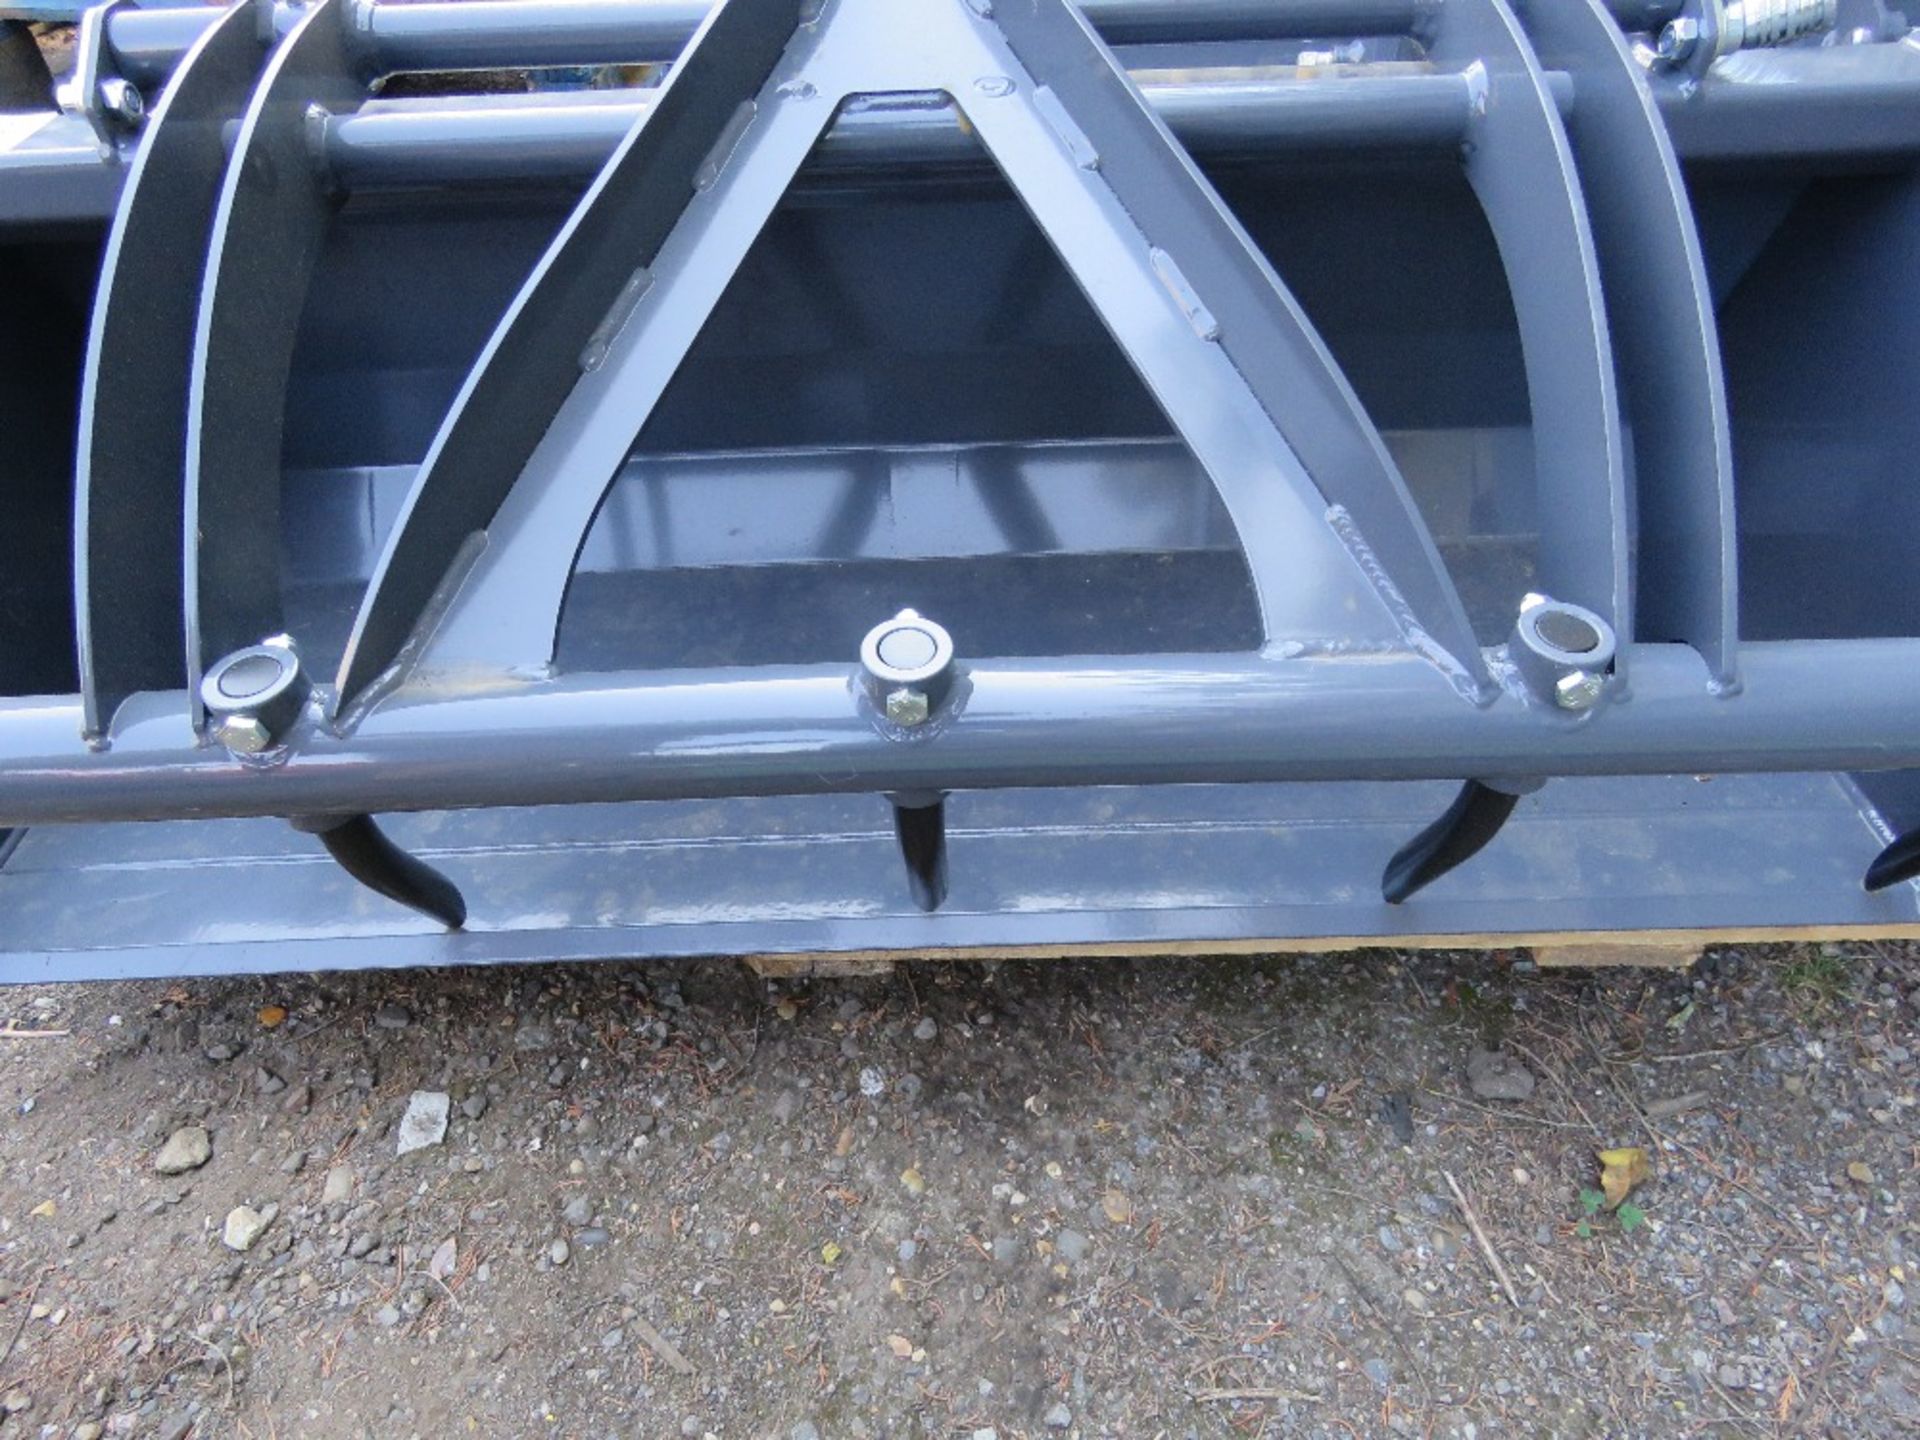 UNUSED MUCK GRAB LADER BUCKET TO SUIT COMPACT TRACTOR OR SKID STEER LOADER ETC. 4FT WIDTH APPROX. - Image 3 of 3